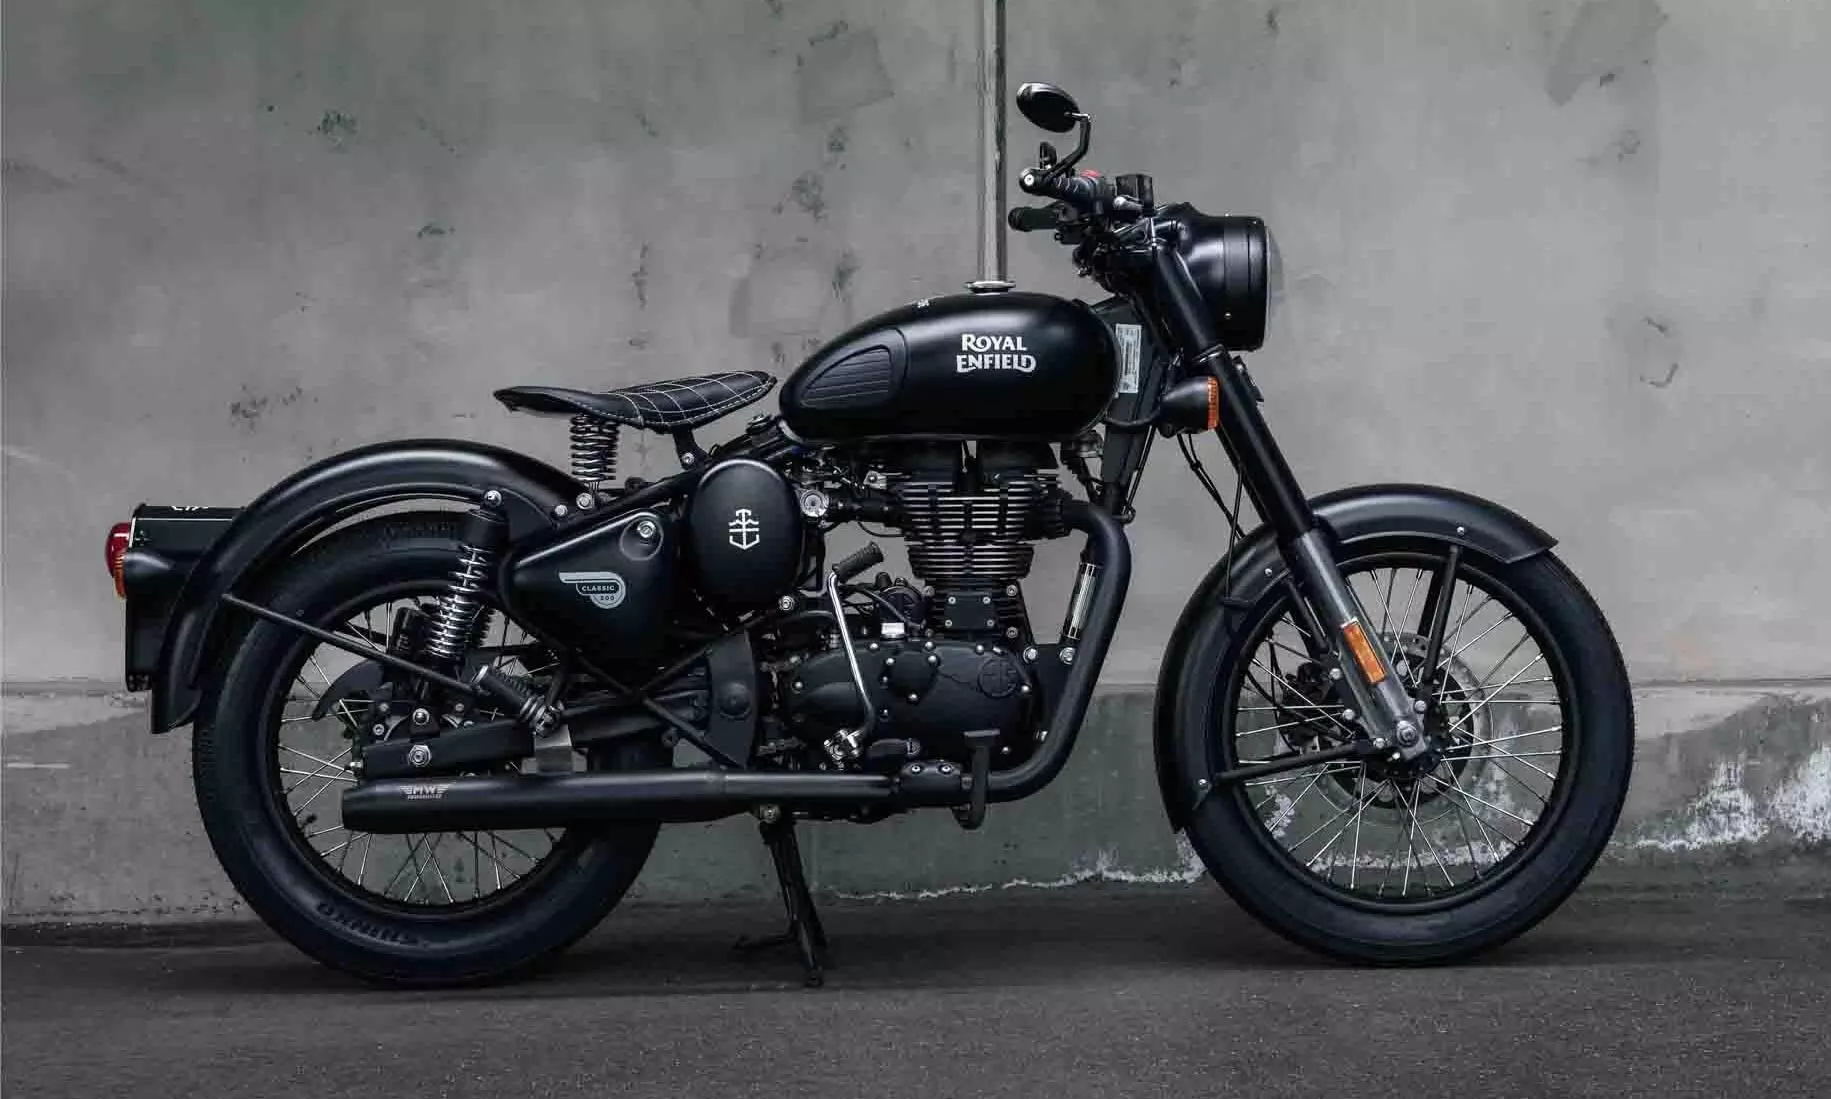 Royal Enfield announces new service package for customers in India